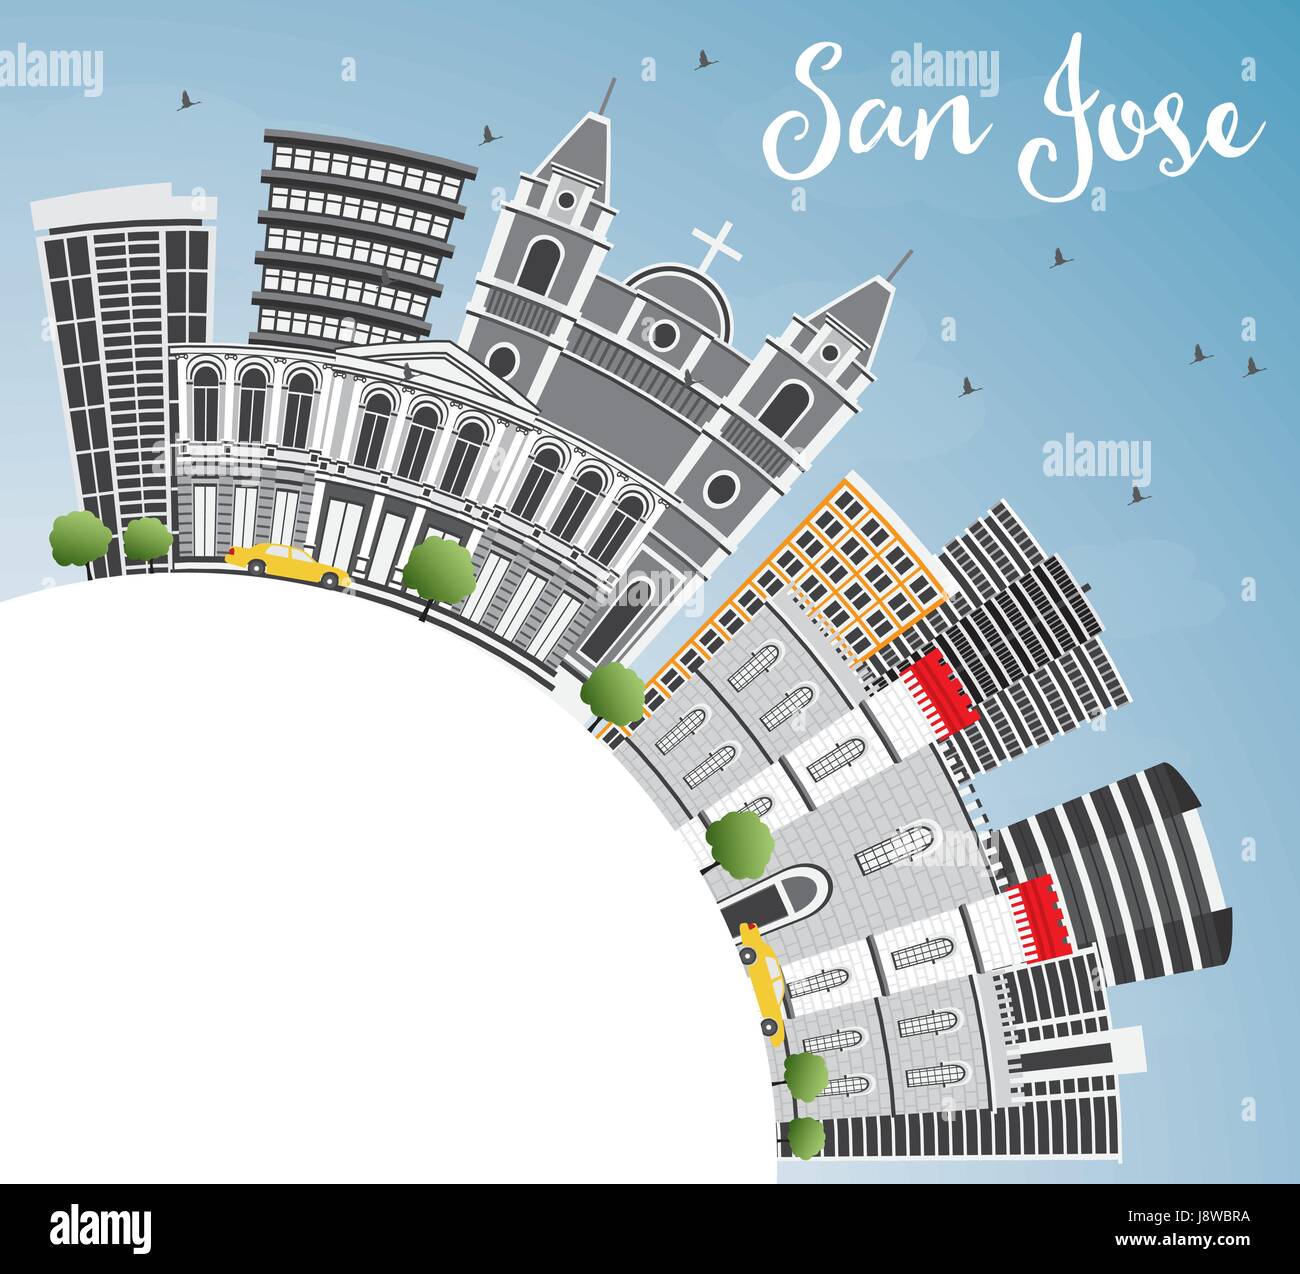 San Jose Skyline with Gray Buildings, Blue Sky and Copy Space. Vector Illustration. Business Travel and Tourism Concept with Modern Architecture. Stock Vector